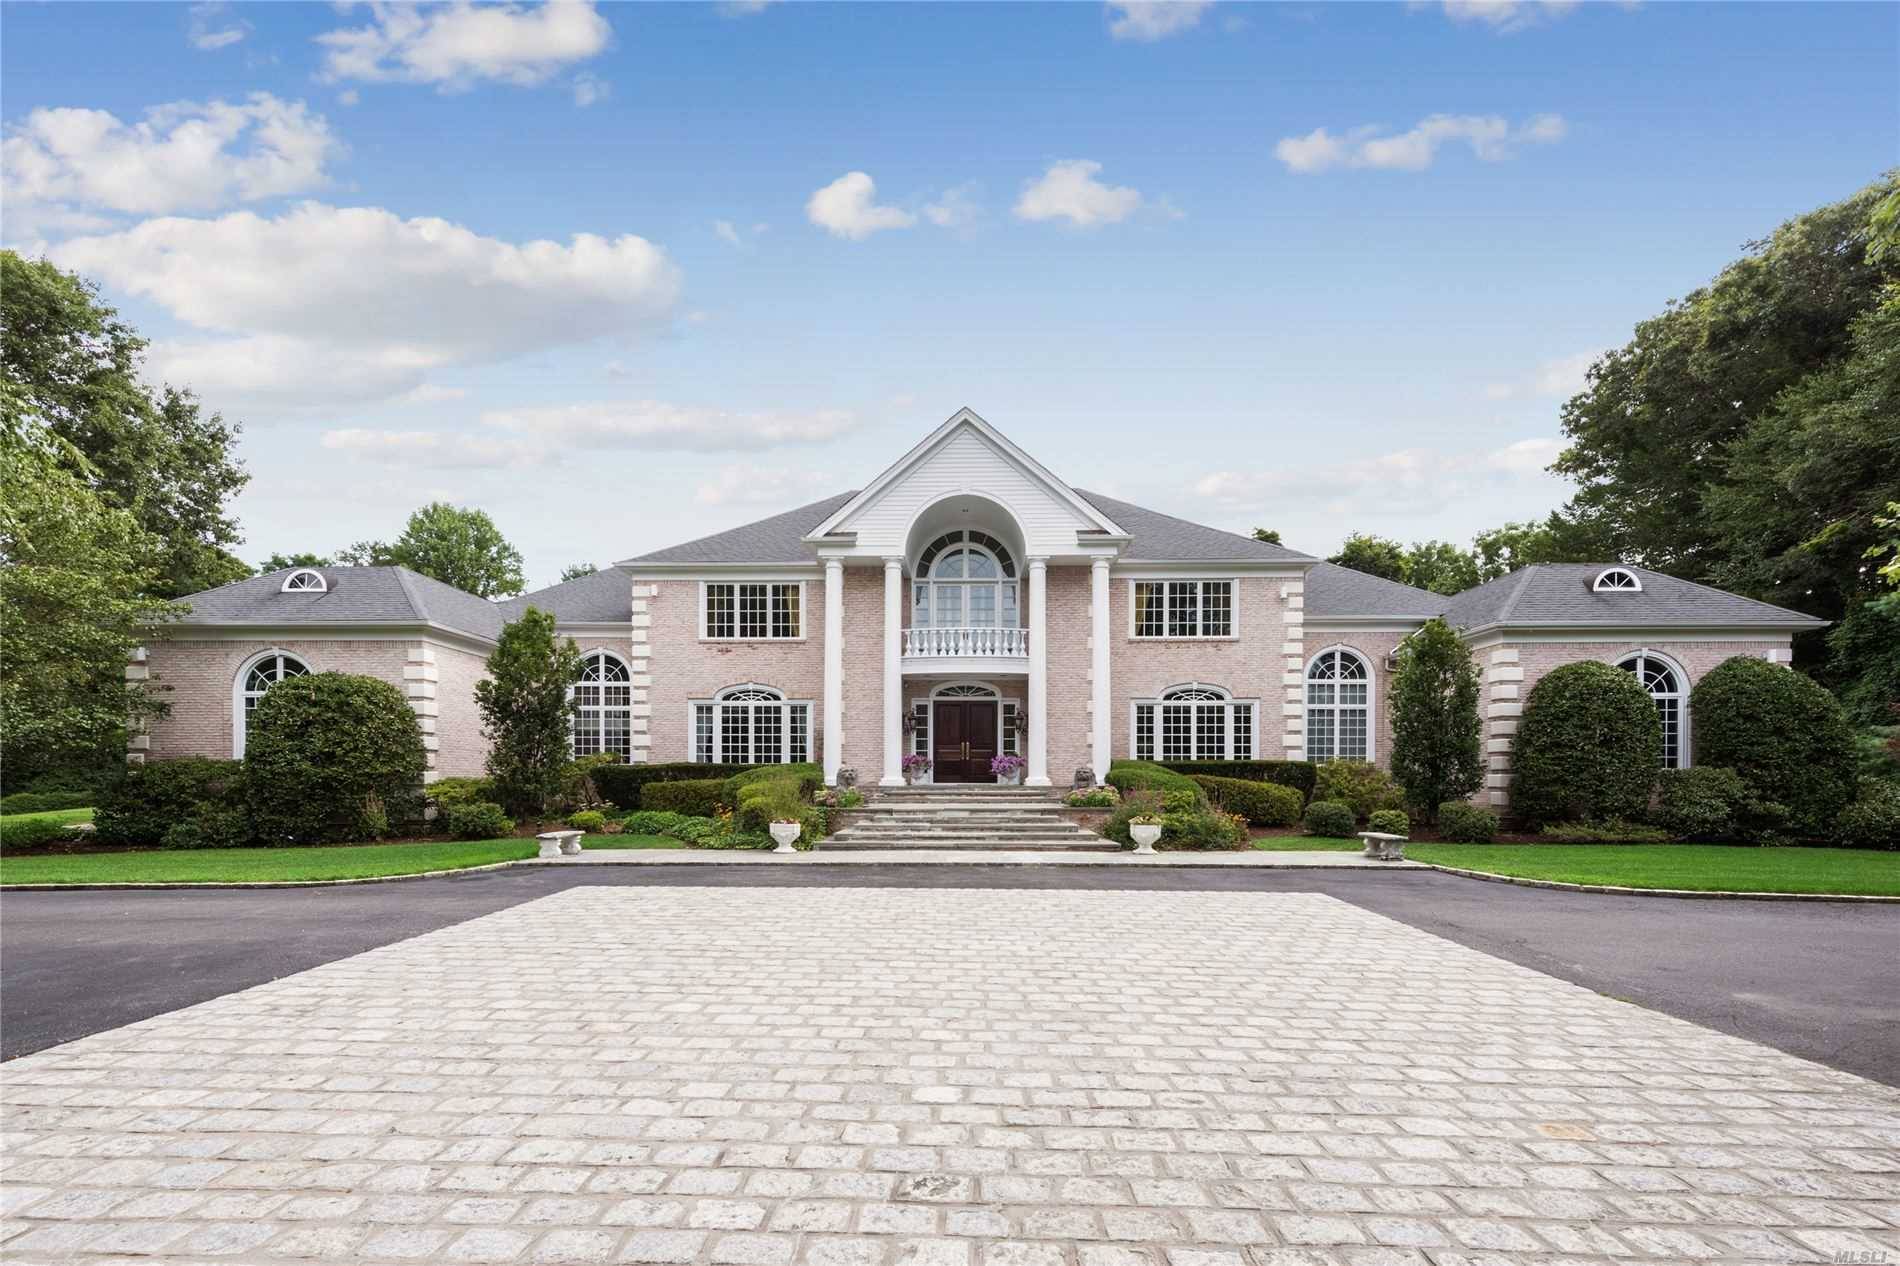 Upper Brookville Luxurious Estate Home with Magnificent Entry Foyer.